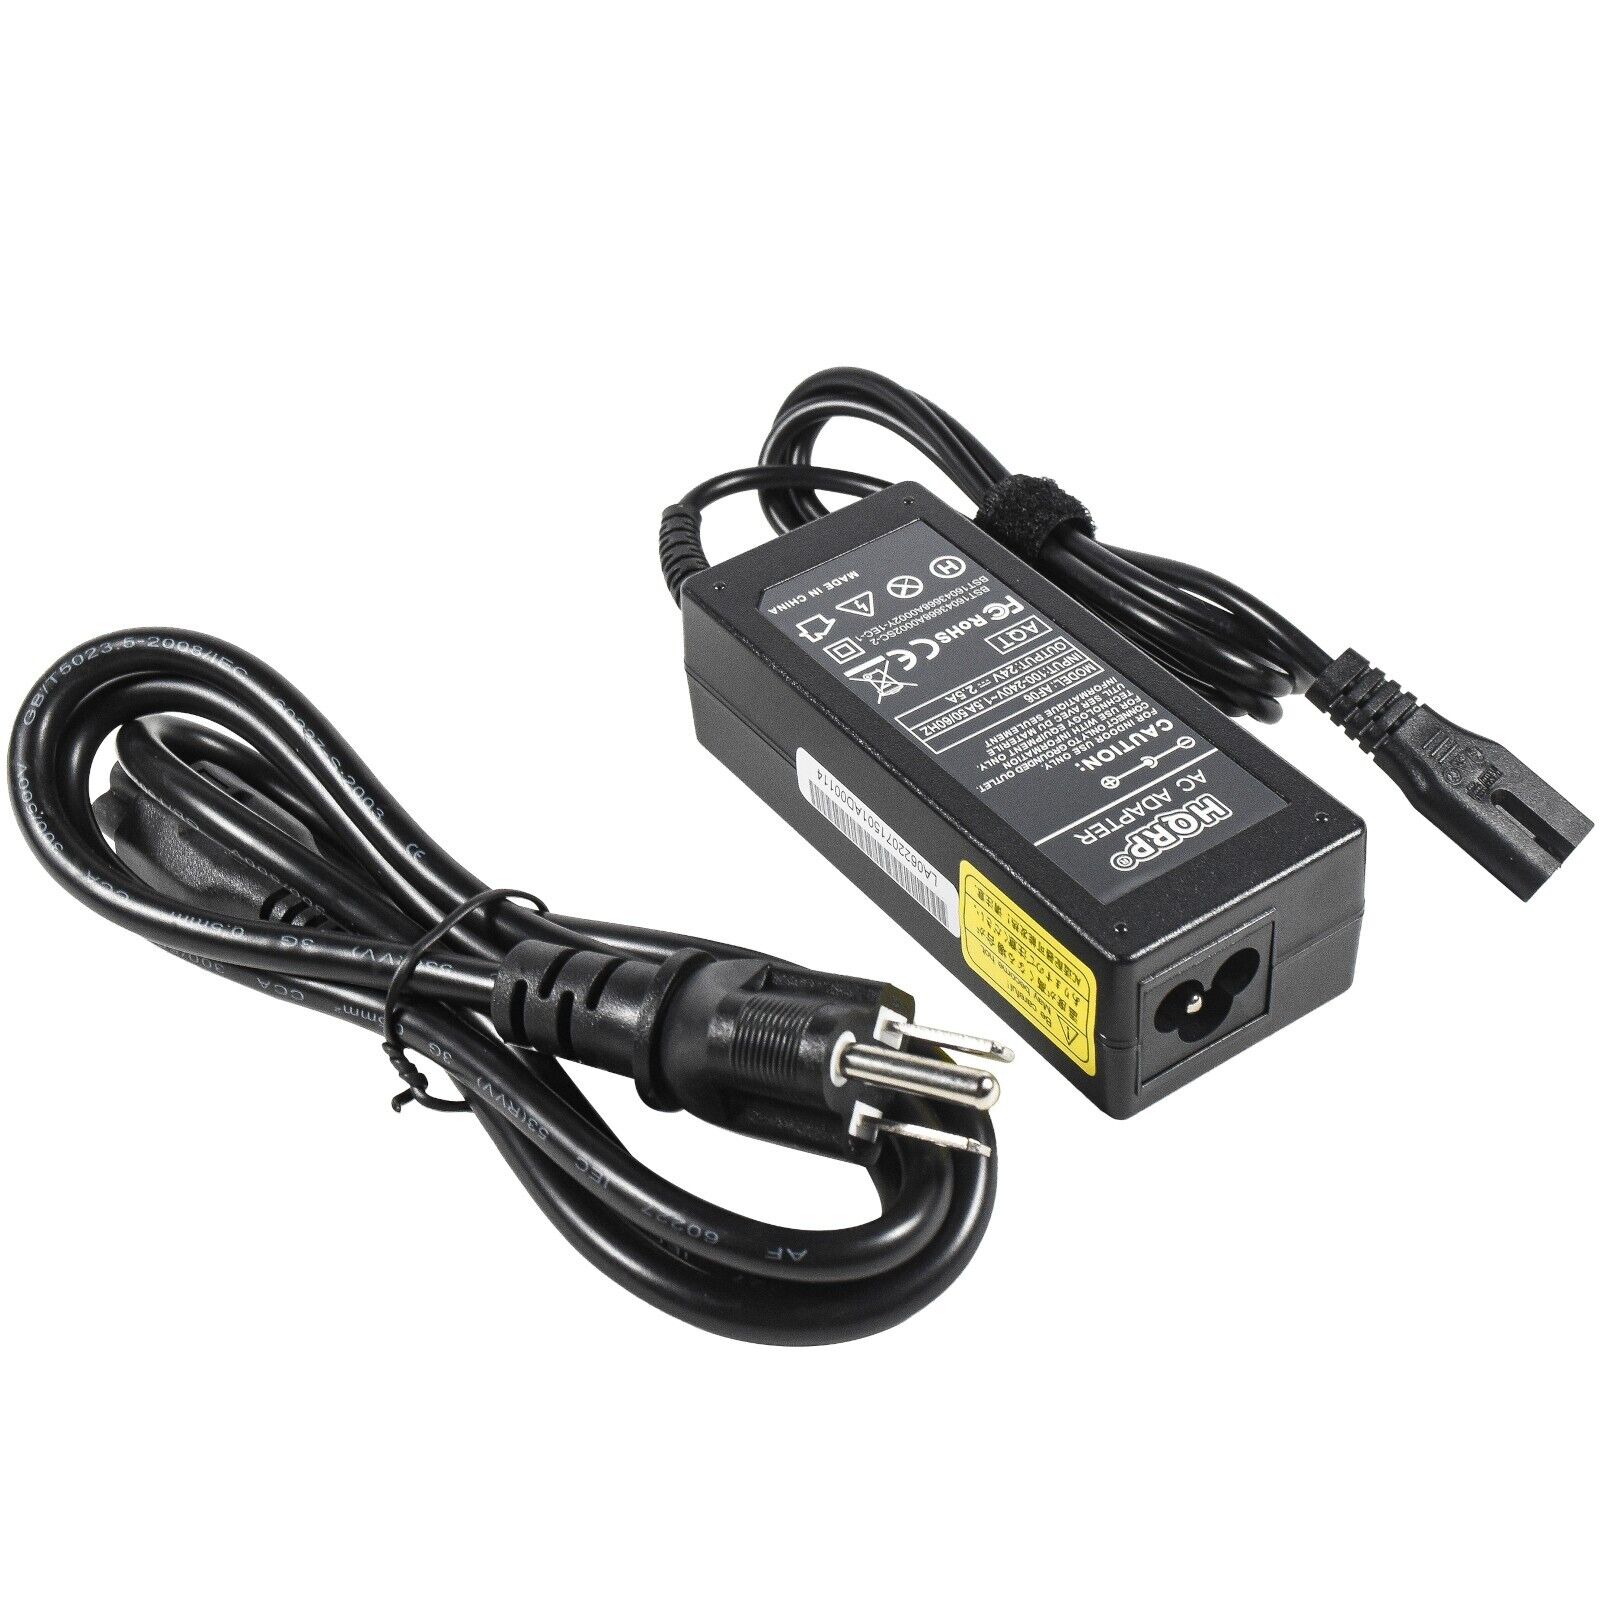 AC Adapter for UComfy 8072 8954 9209 4A201201 YH-3318G Massagers Type AC Power Adapter Input 100-240V AC Compatible Mod